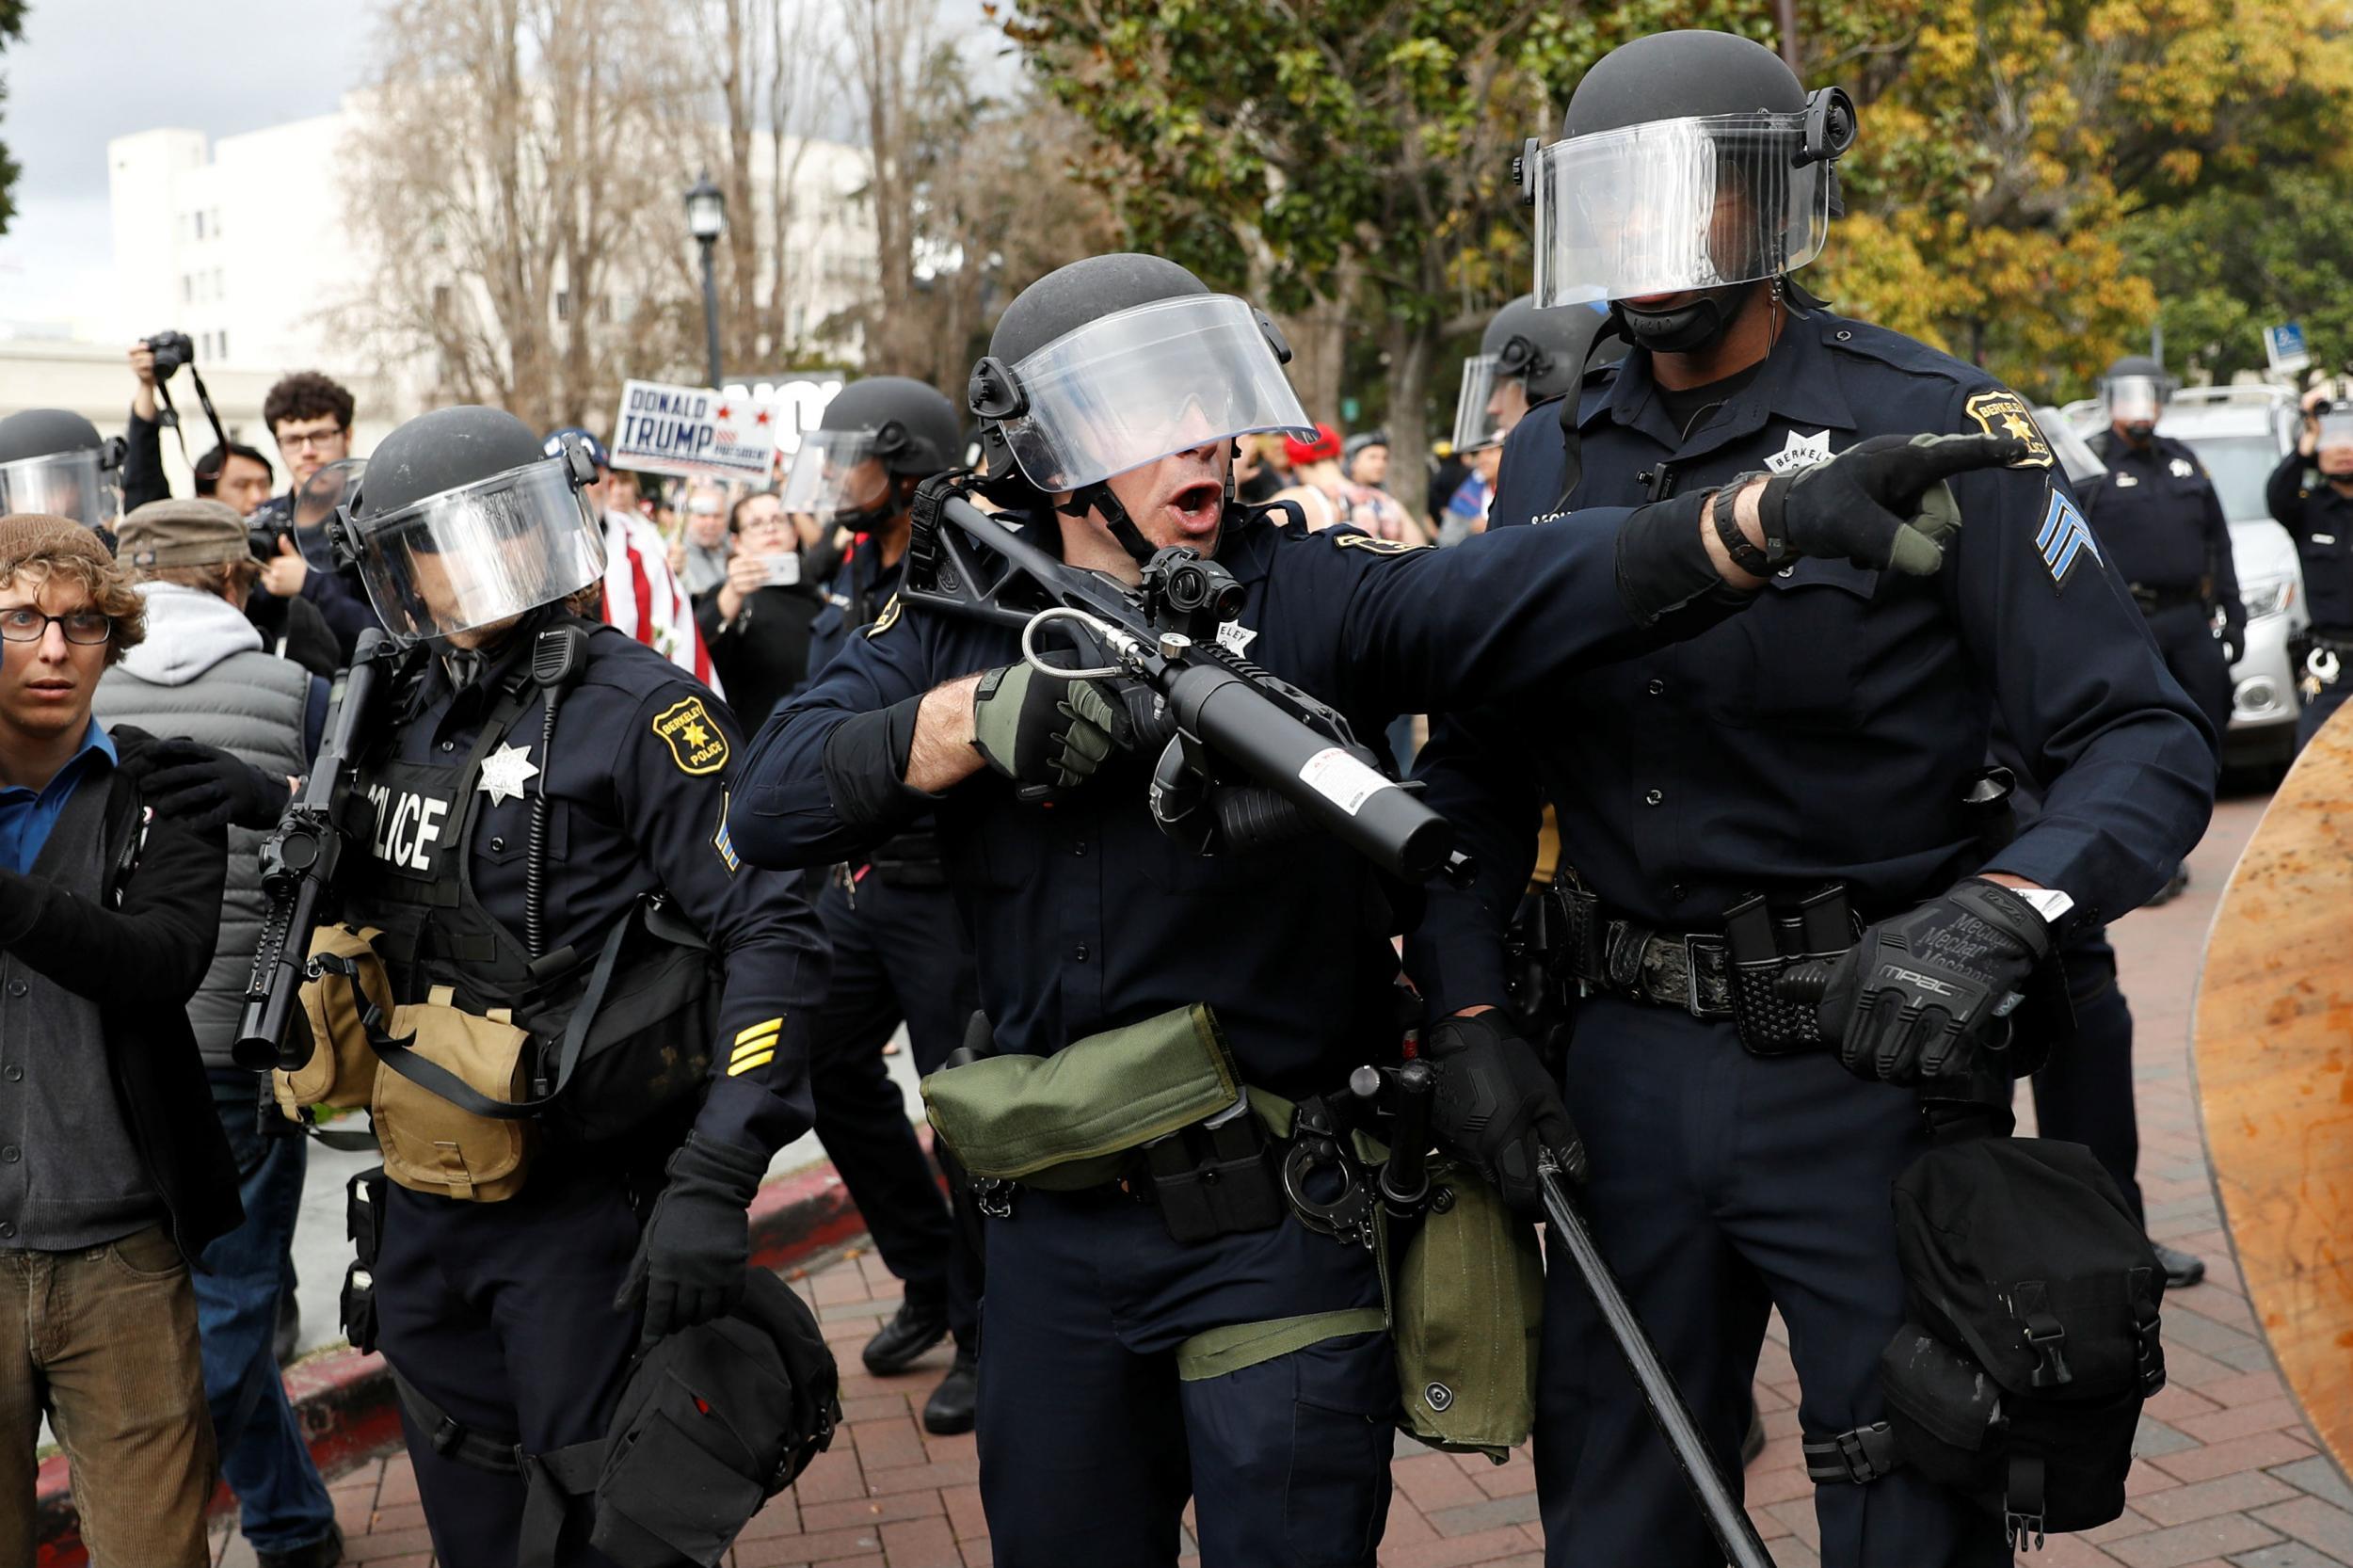 A police officer gestures as supporters of Donald Trump and counter-protesters scuffle at Berkeley earlier this year